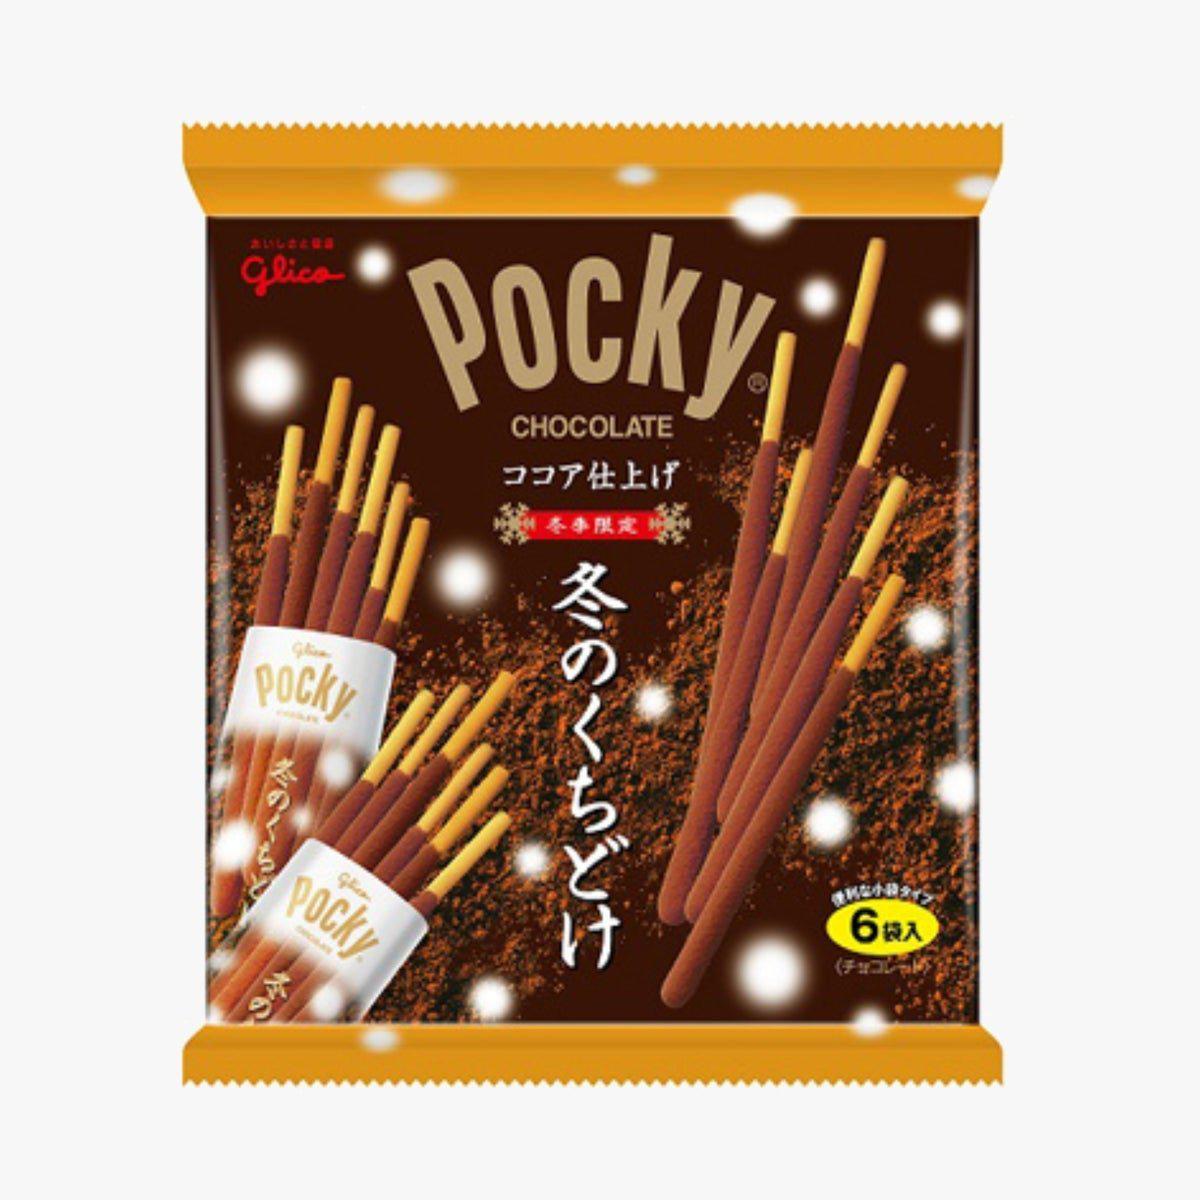 Pocky Winter Melty Chocolate Cocoa 6 Pack (Japan) 139g Best Before October 2022 - Candy Mail UK